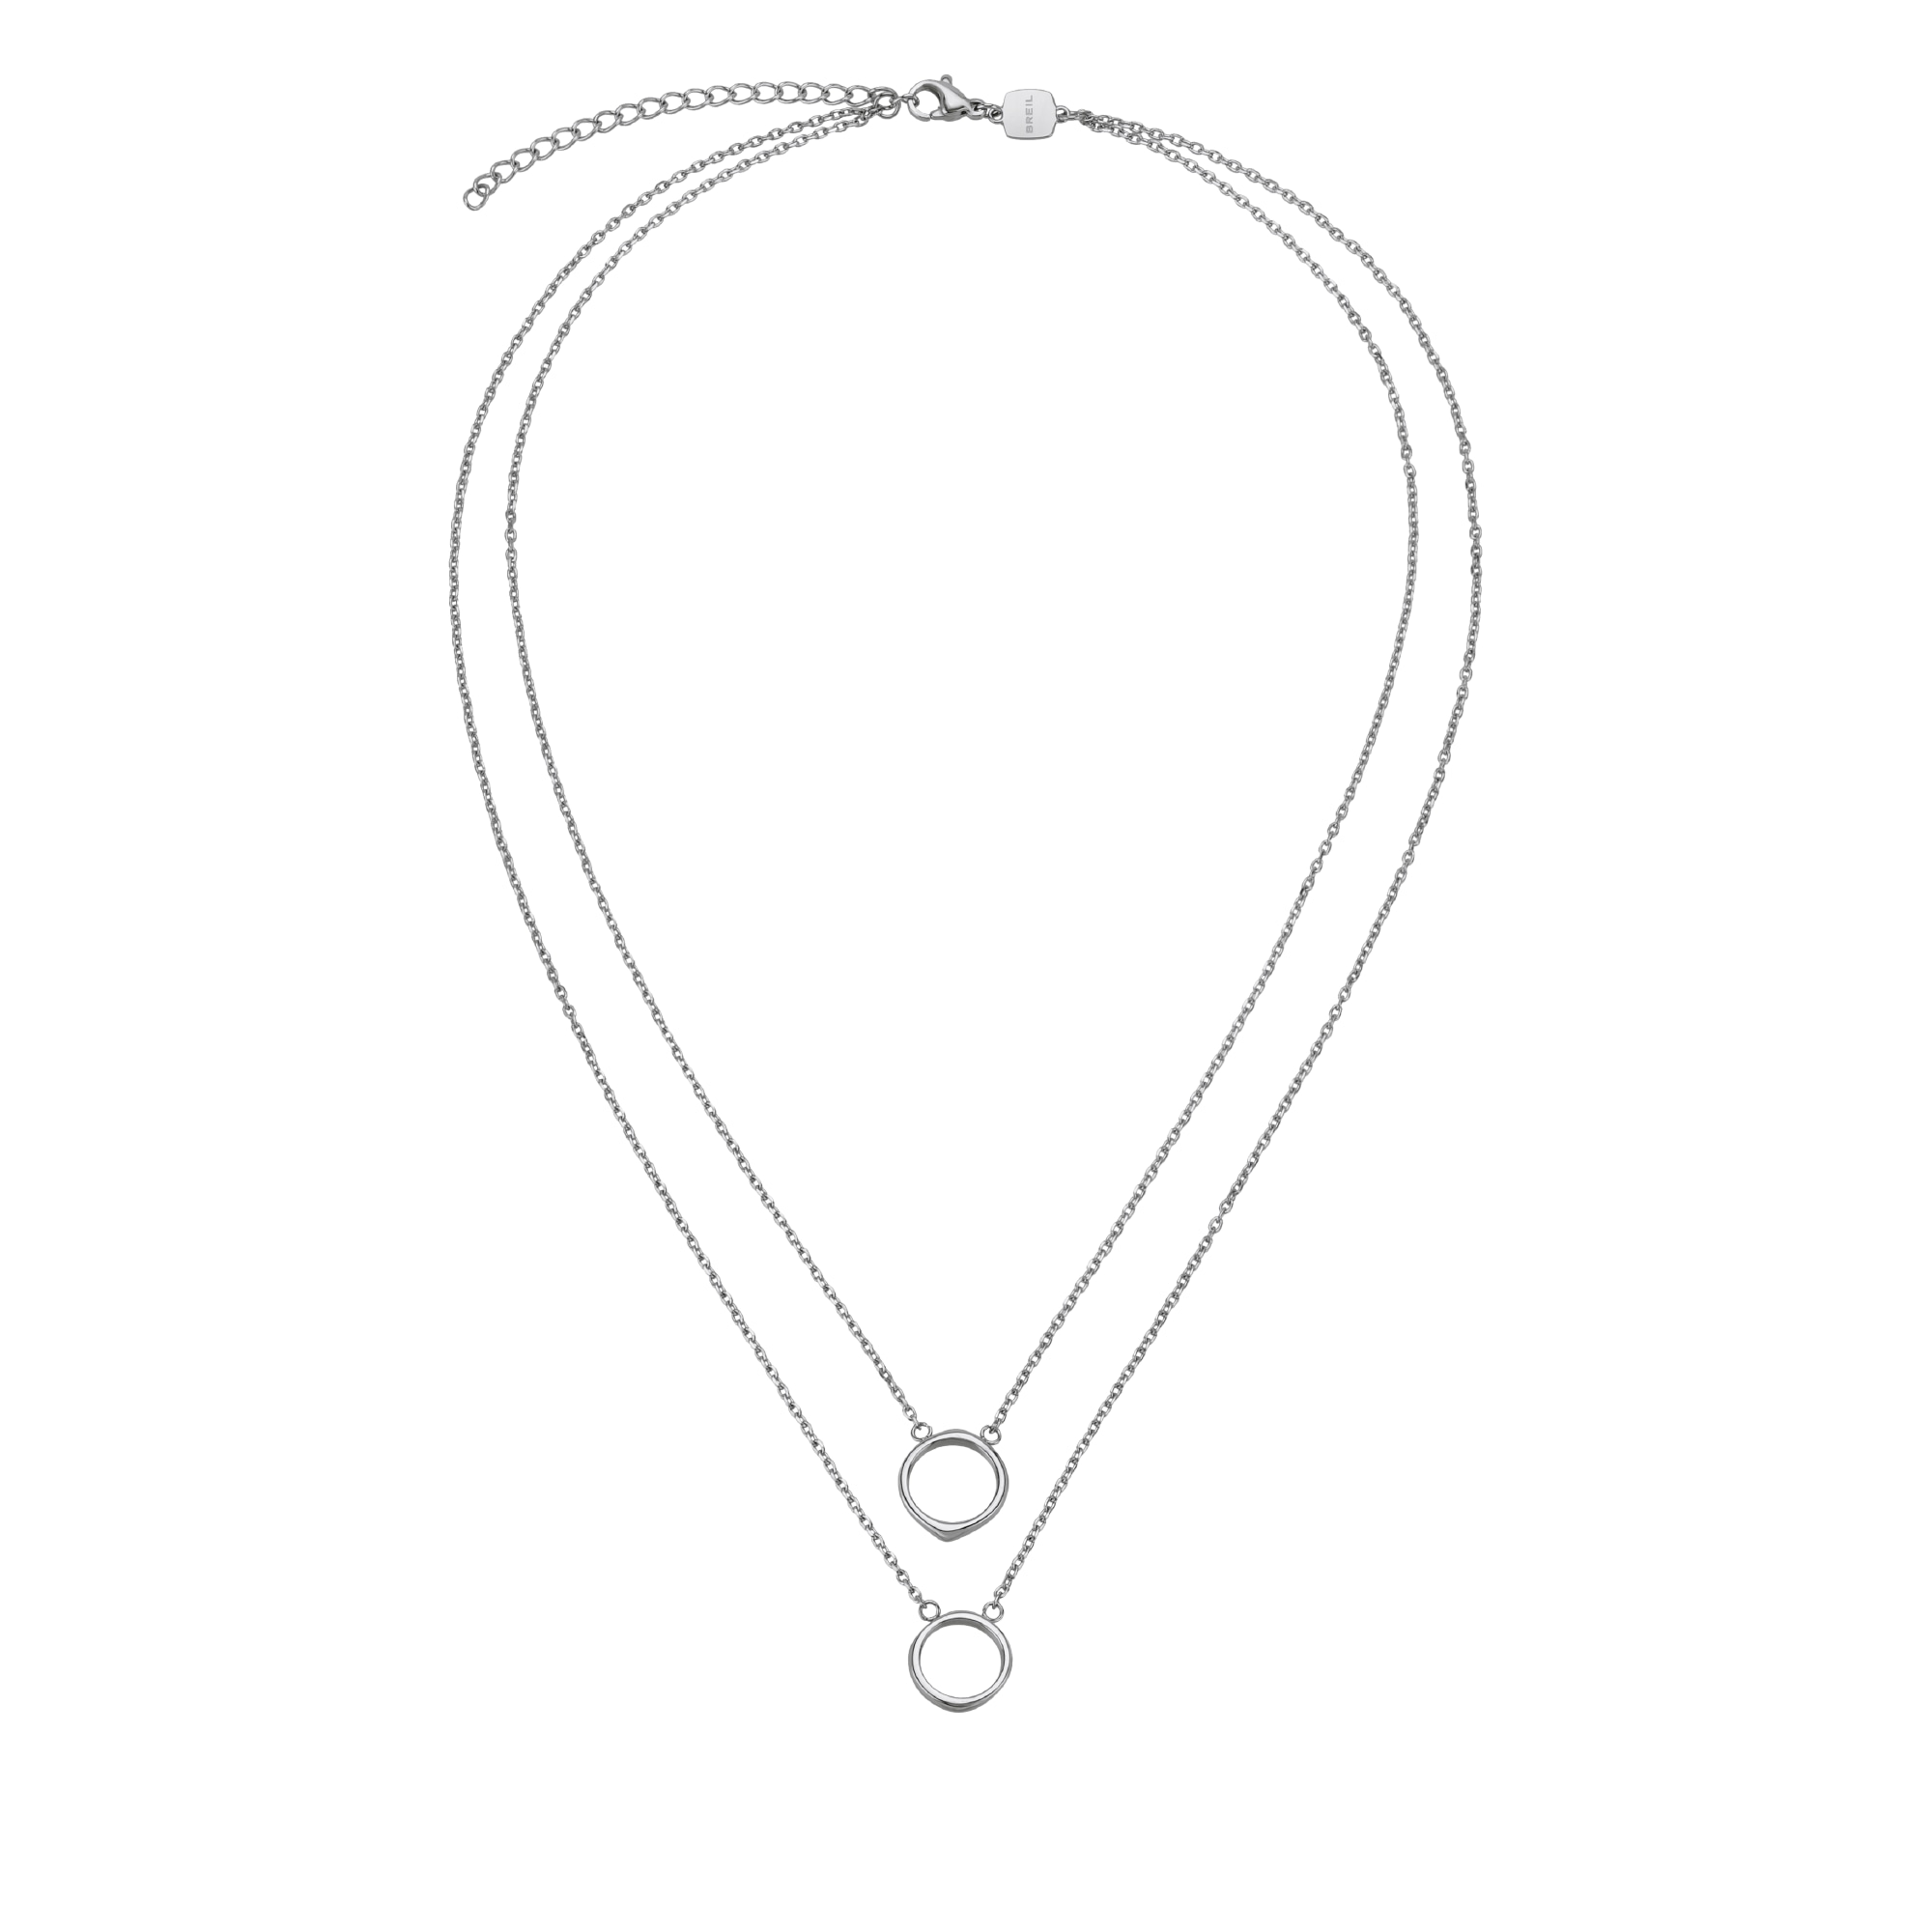 NEW TETRA - SET OF 2 STAINLESS STEEL NECKLACES - 2 - TJ3169 | Breil